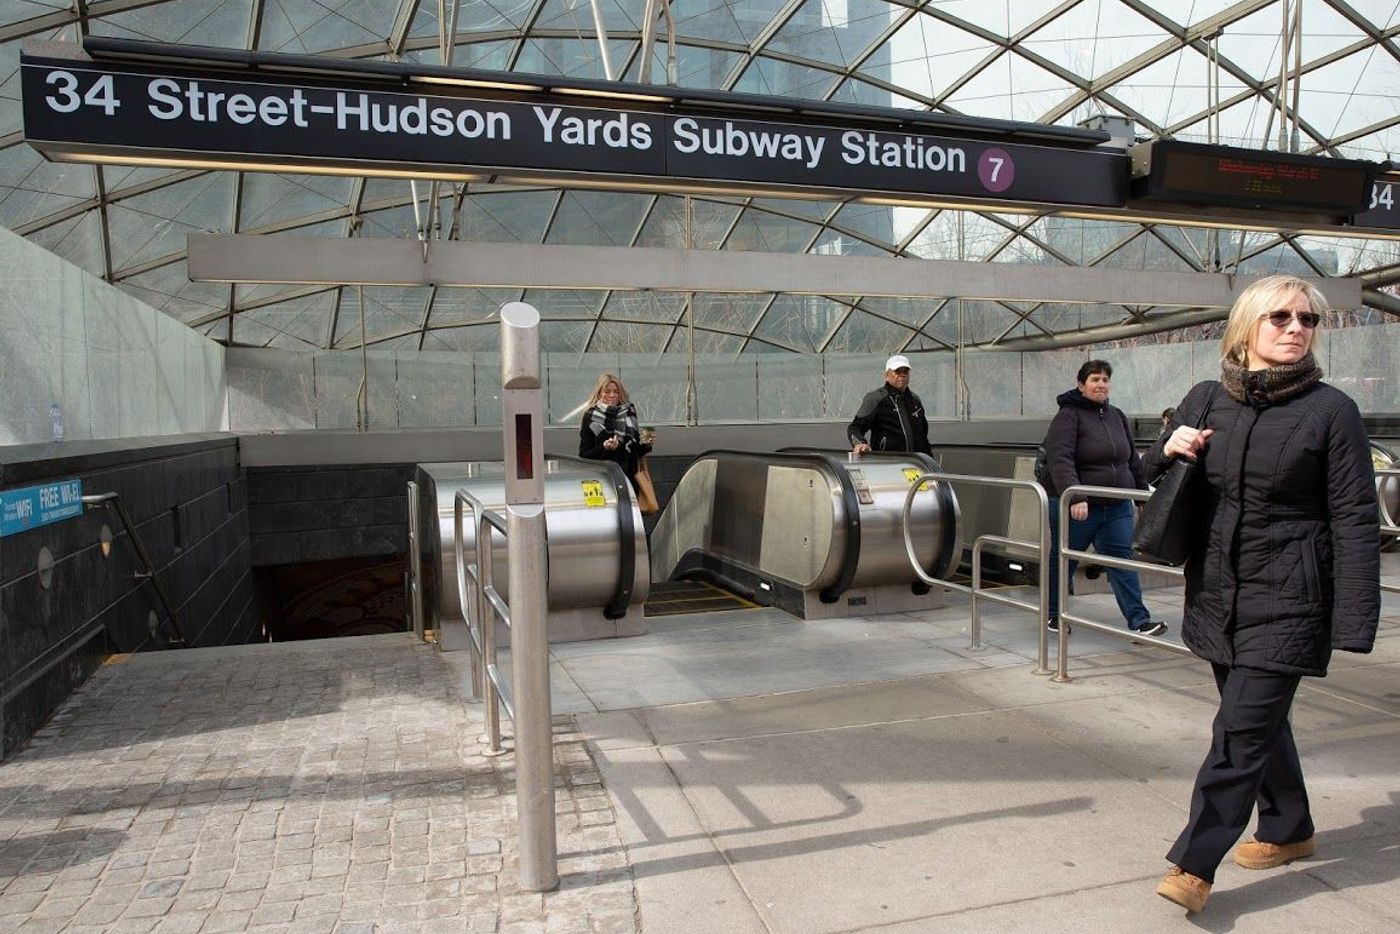 Escalators at the Hudson Yards subway station have been beset with problems since the station opened in 2015.